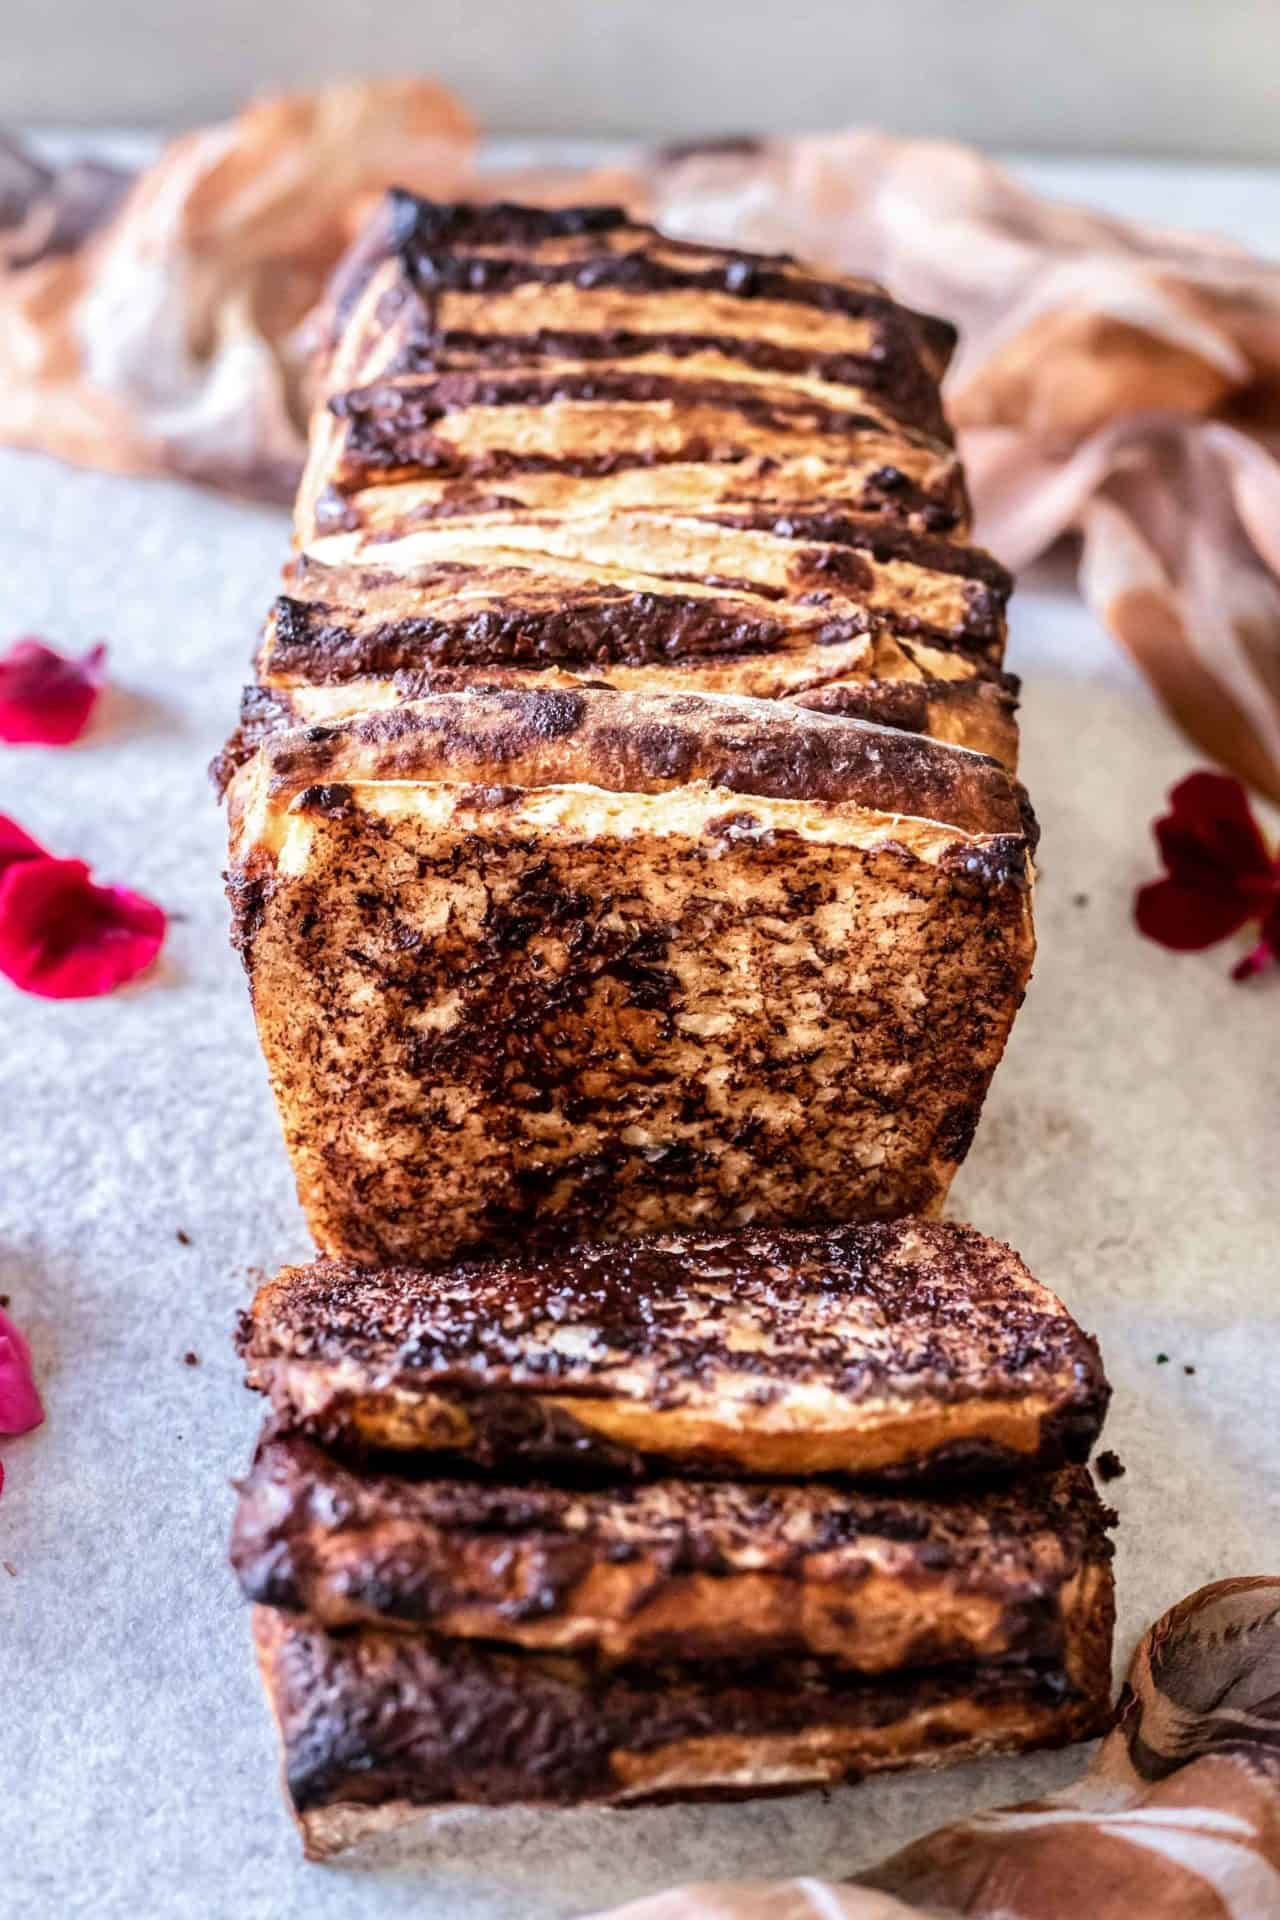 This Gluten-Free Nutella Pull-Apart Bread is pillowy soft, tender, chocolaty, Nutella-infused, flavorful and so delicious!